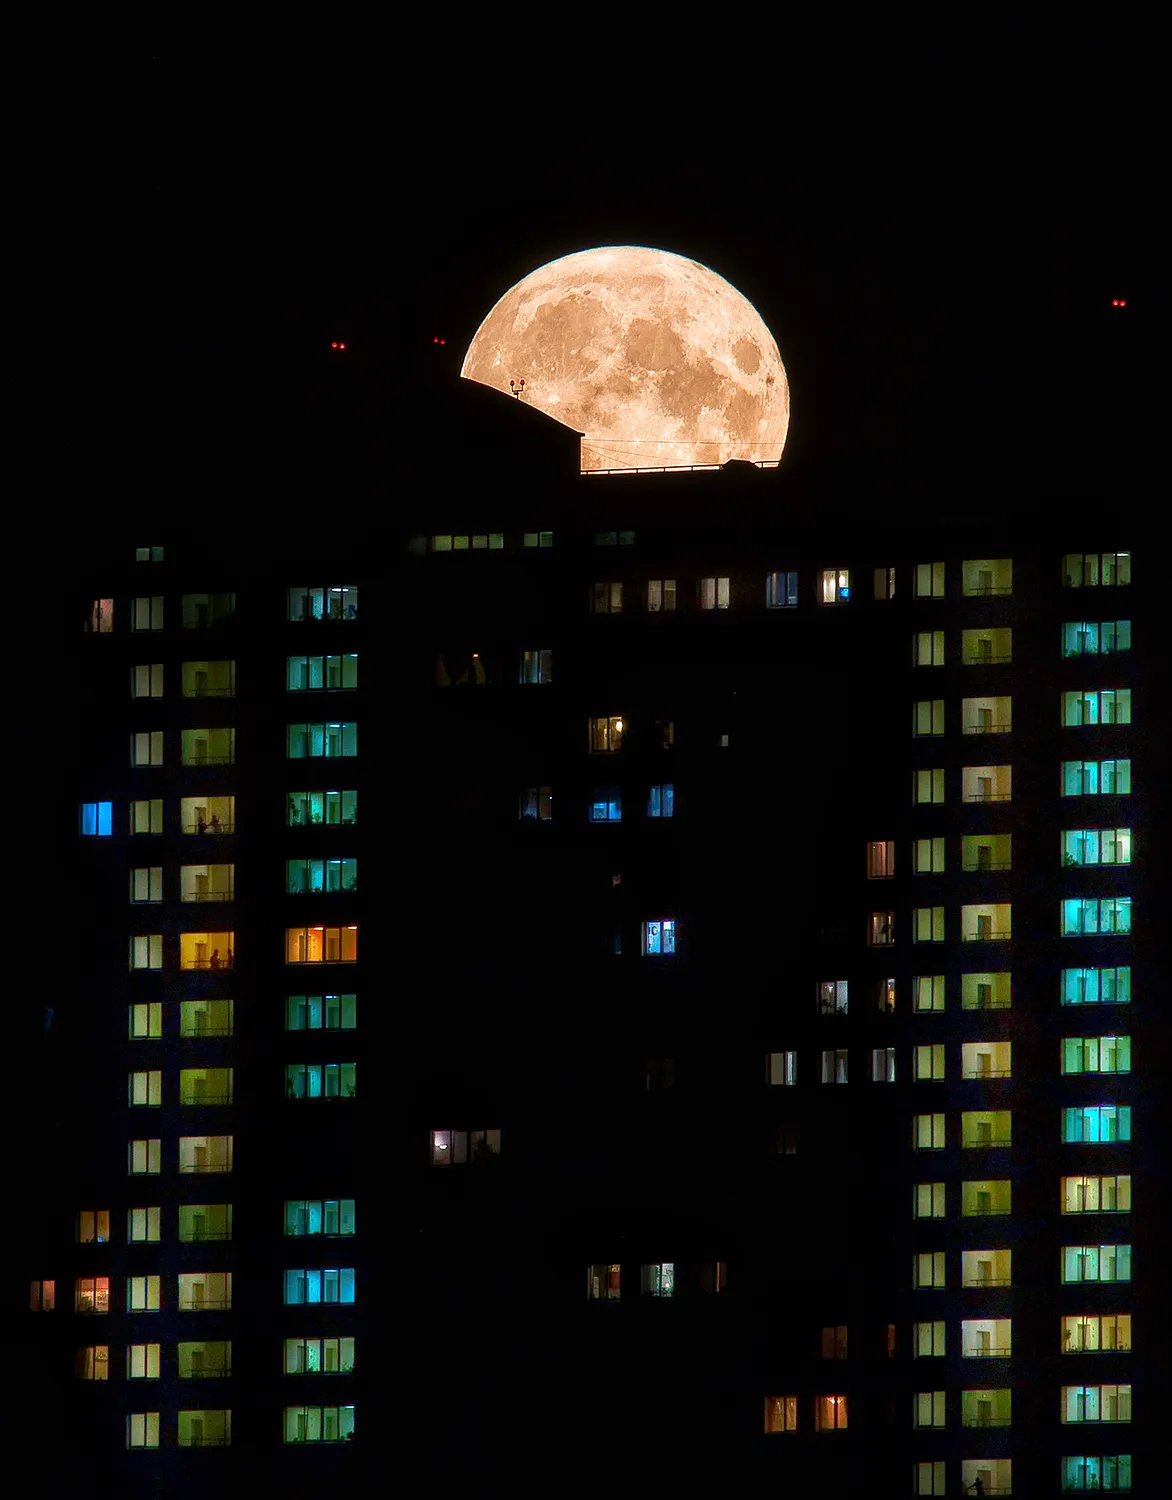 The Full Moon in Moscow © Anna Kaunis (Russia), Hodynka, Moscow, Russia, 3 July 2020. Equipment: Nikon Z6 camera, 200–500mm lens at 500 mm f/22, ISO 400, 0.25-second exposure